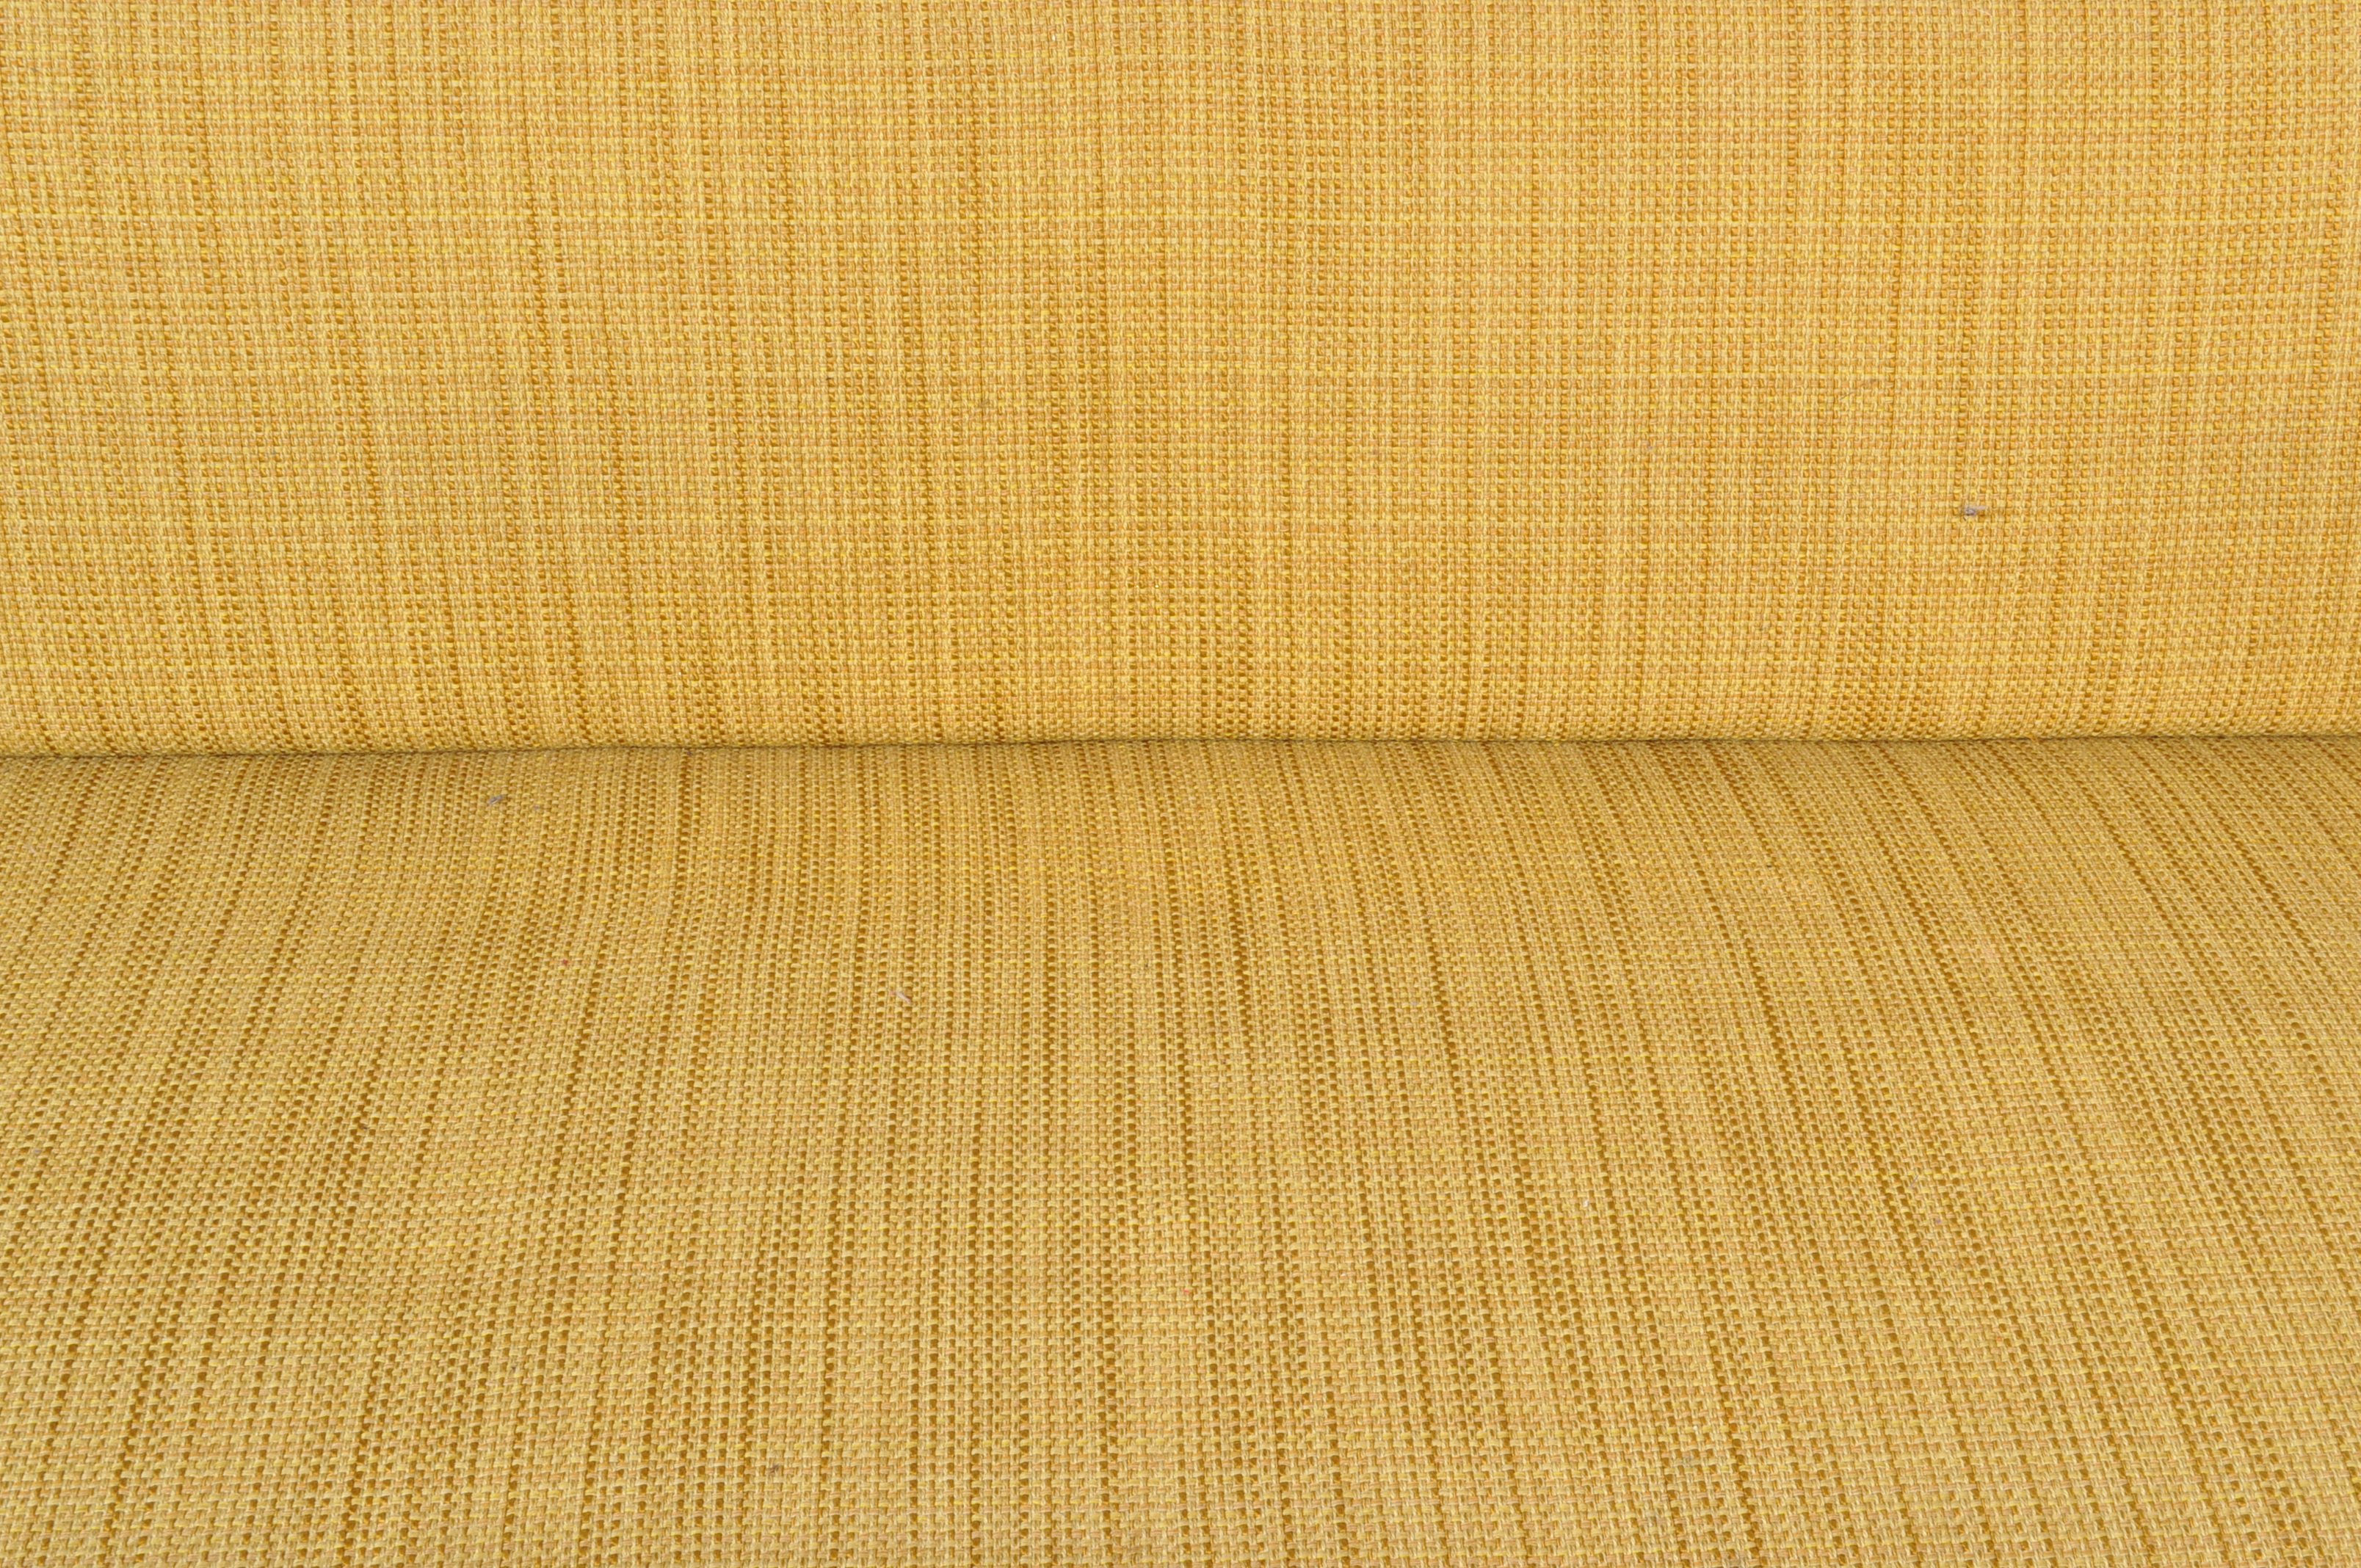 MID-CENTURY SCANDART MANNER SOFA BED / DAY BED - Image 7 of 7